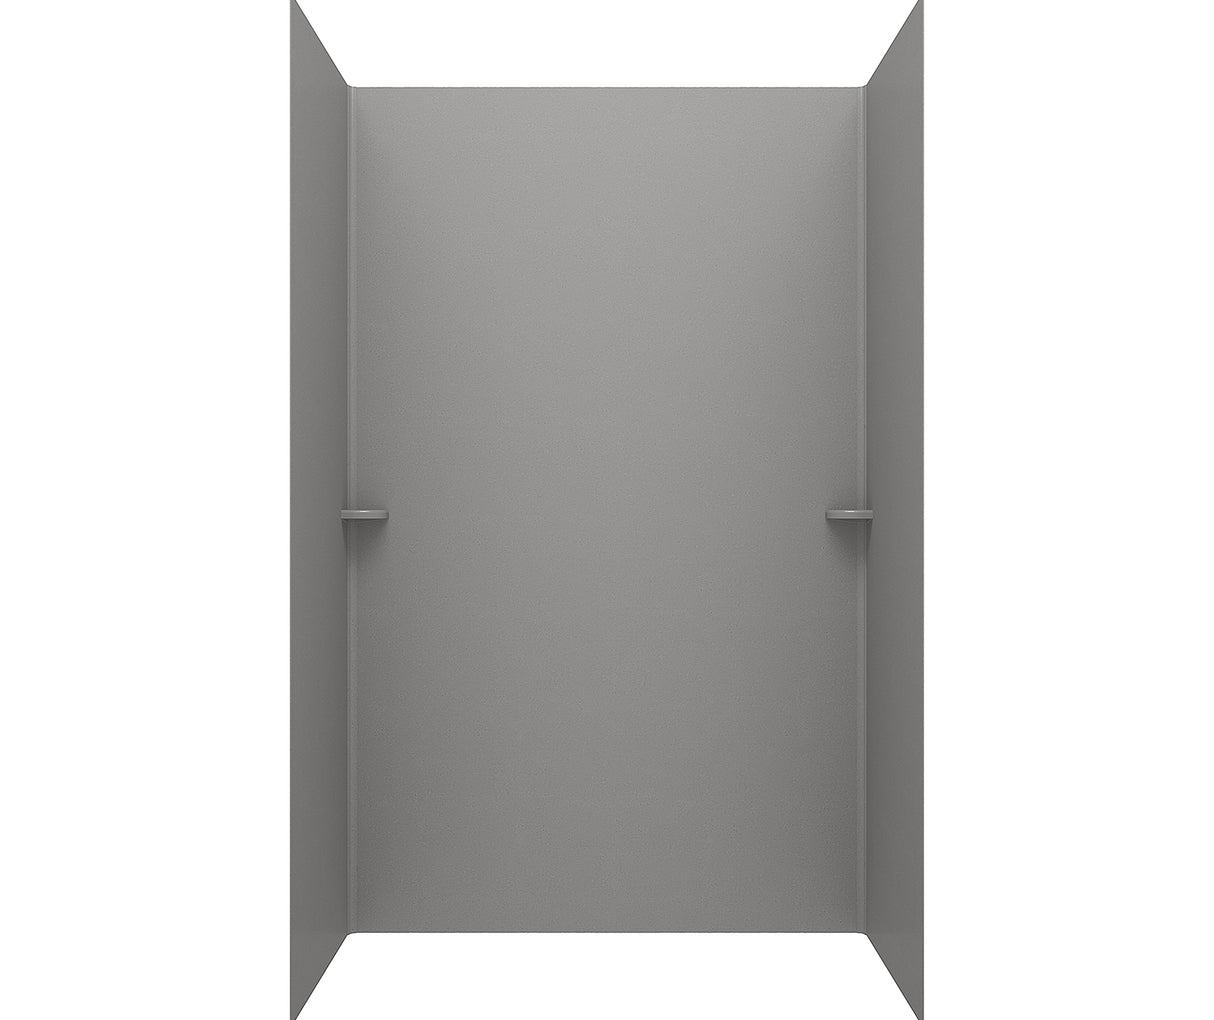 Swanstone SK-364896 36 x 48 x 96 Swanstone Smooth Glue up Shower Wall Kit in Ash Gray SK364896.203